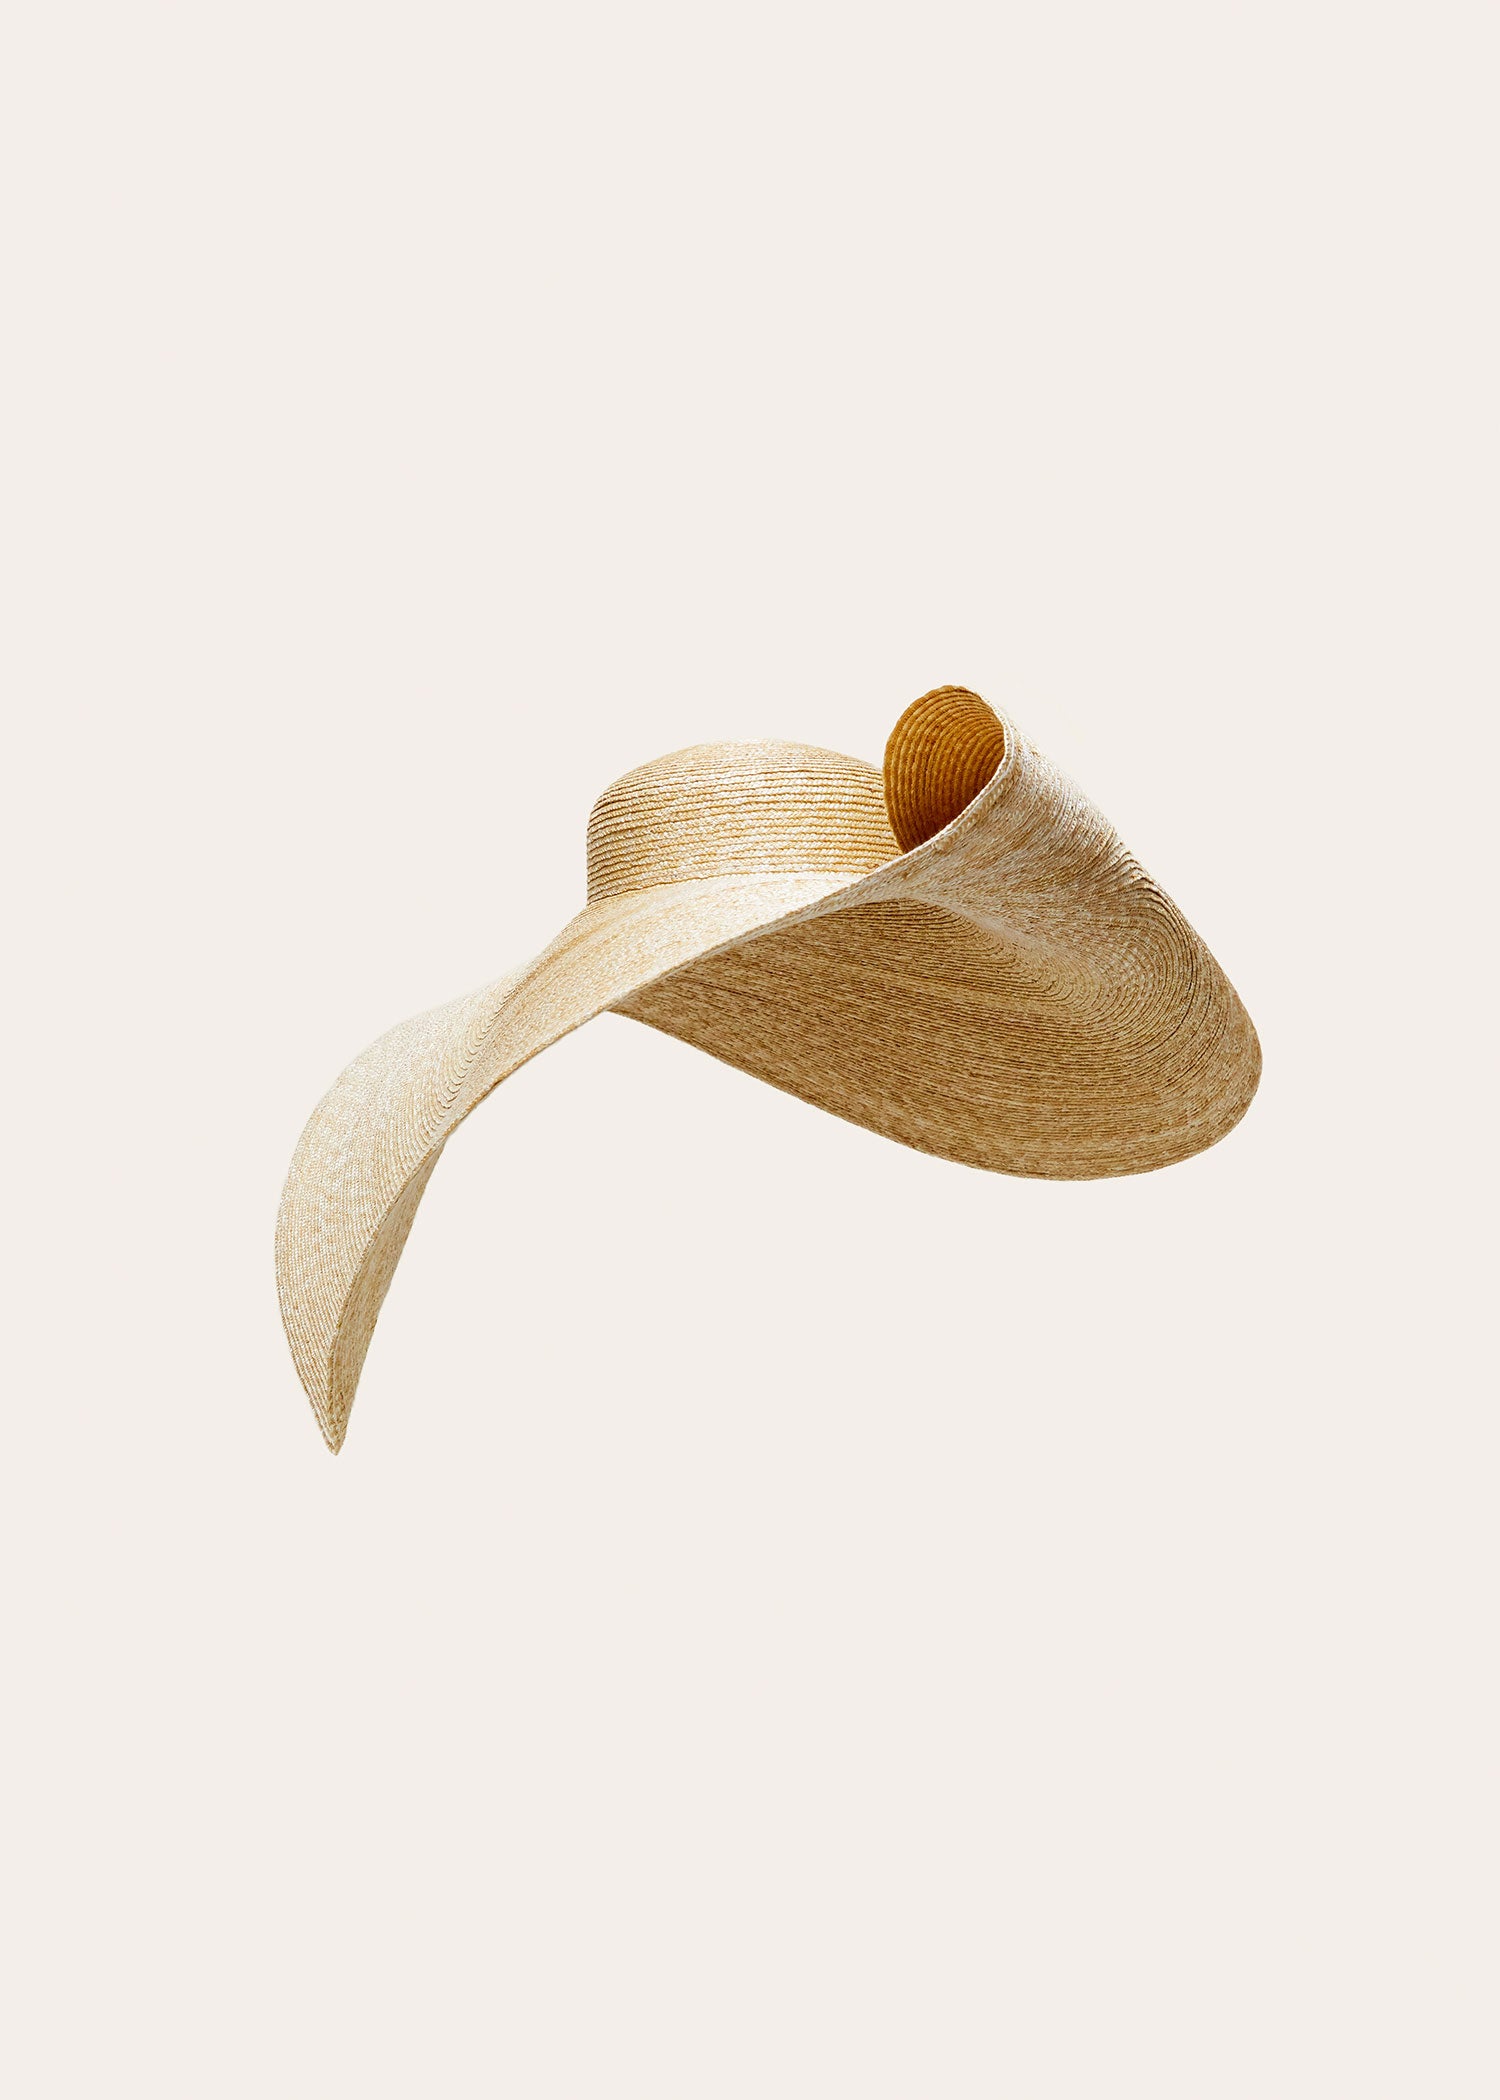 What I Screenshot This Week: The Shadiest Wide-Brimmed Hat in The Land